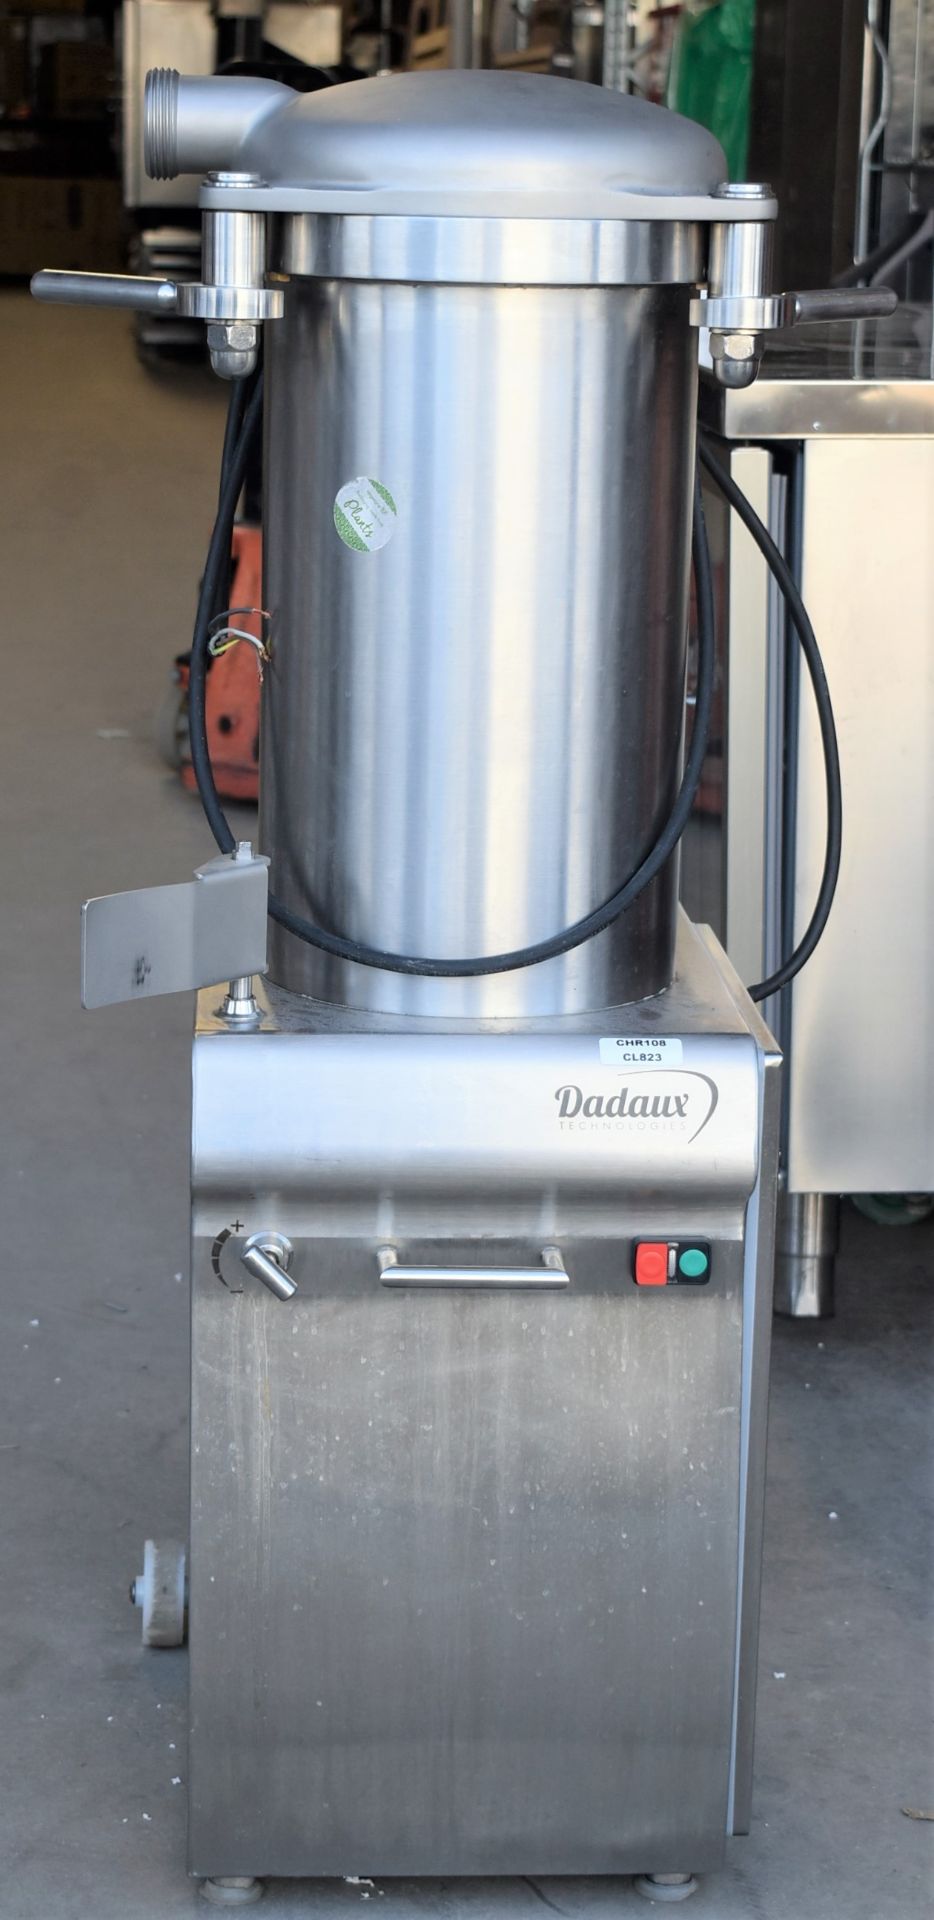 1 x Dadaux PHX25 Hydraulic Sausage Filler / Stuffer - Single Phase - Stainless Steel - RRP £4,900 - Image 3 of 4